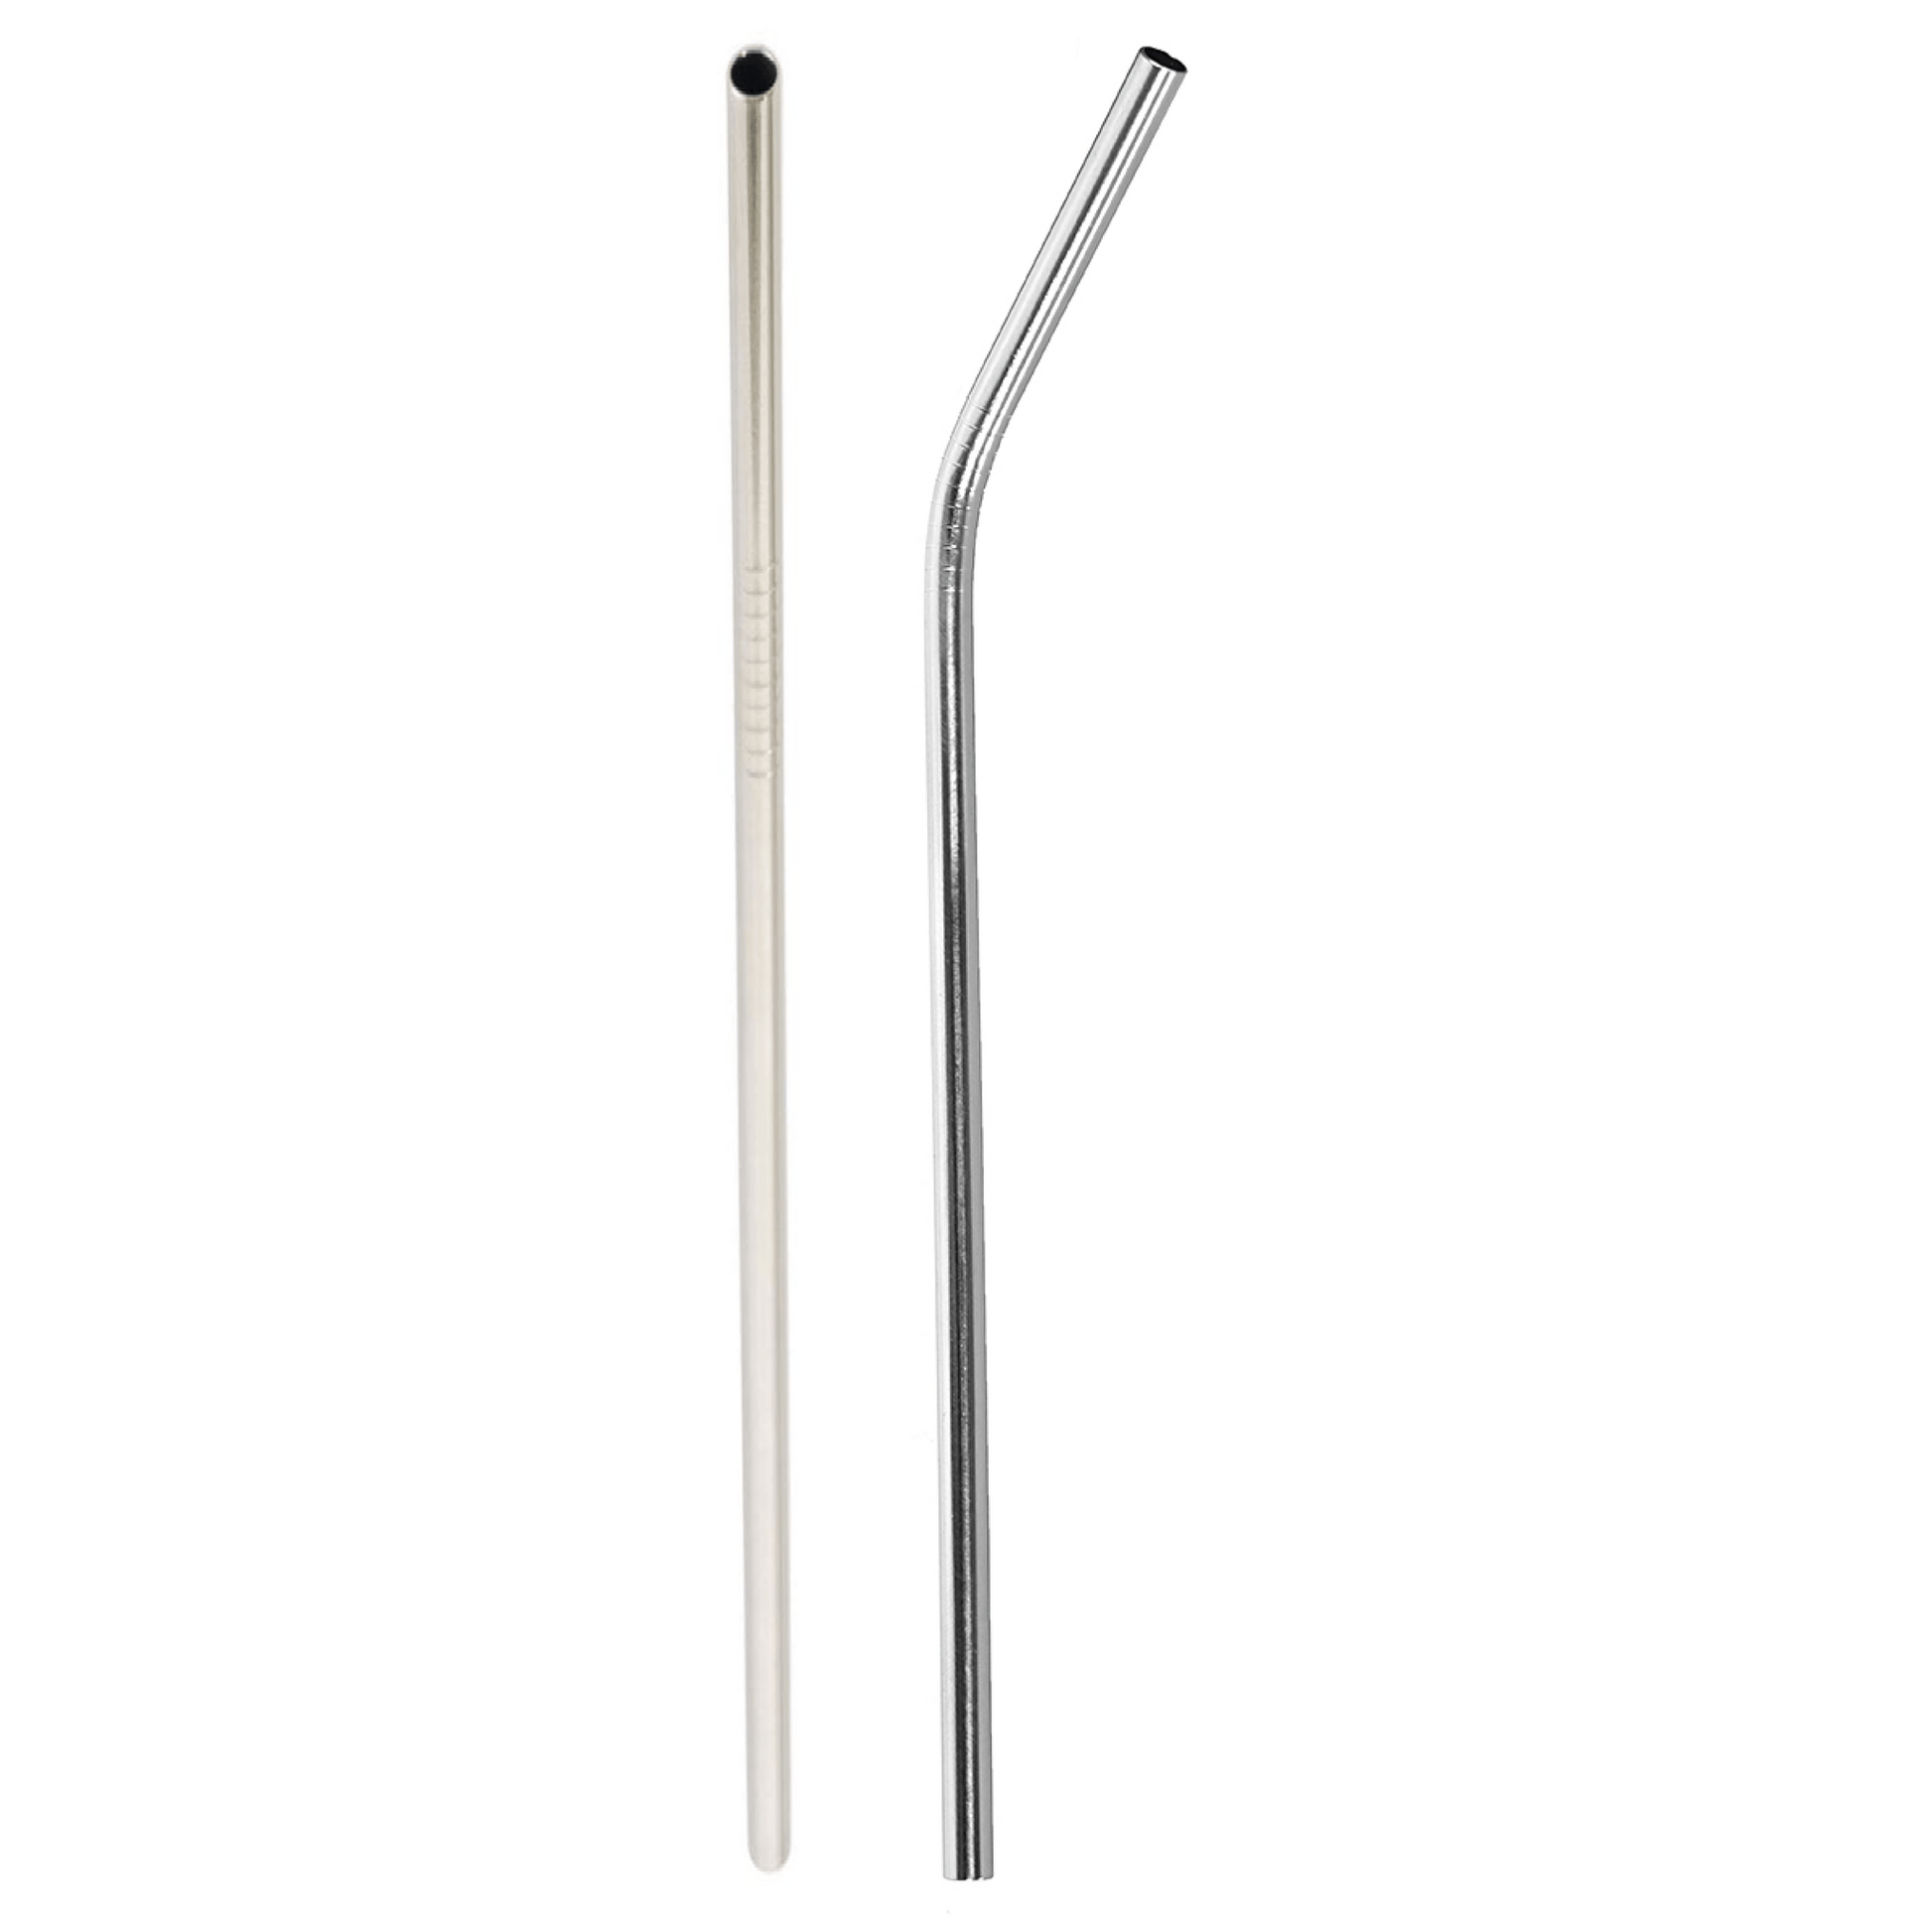 Metal Straw Cover 